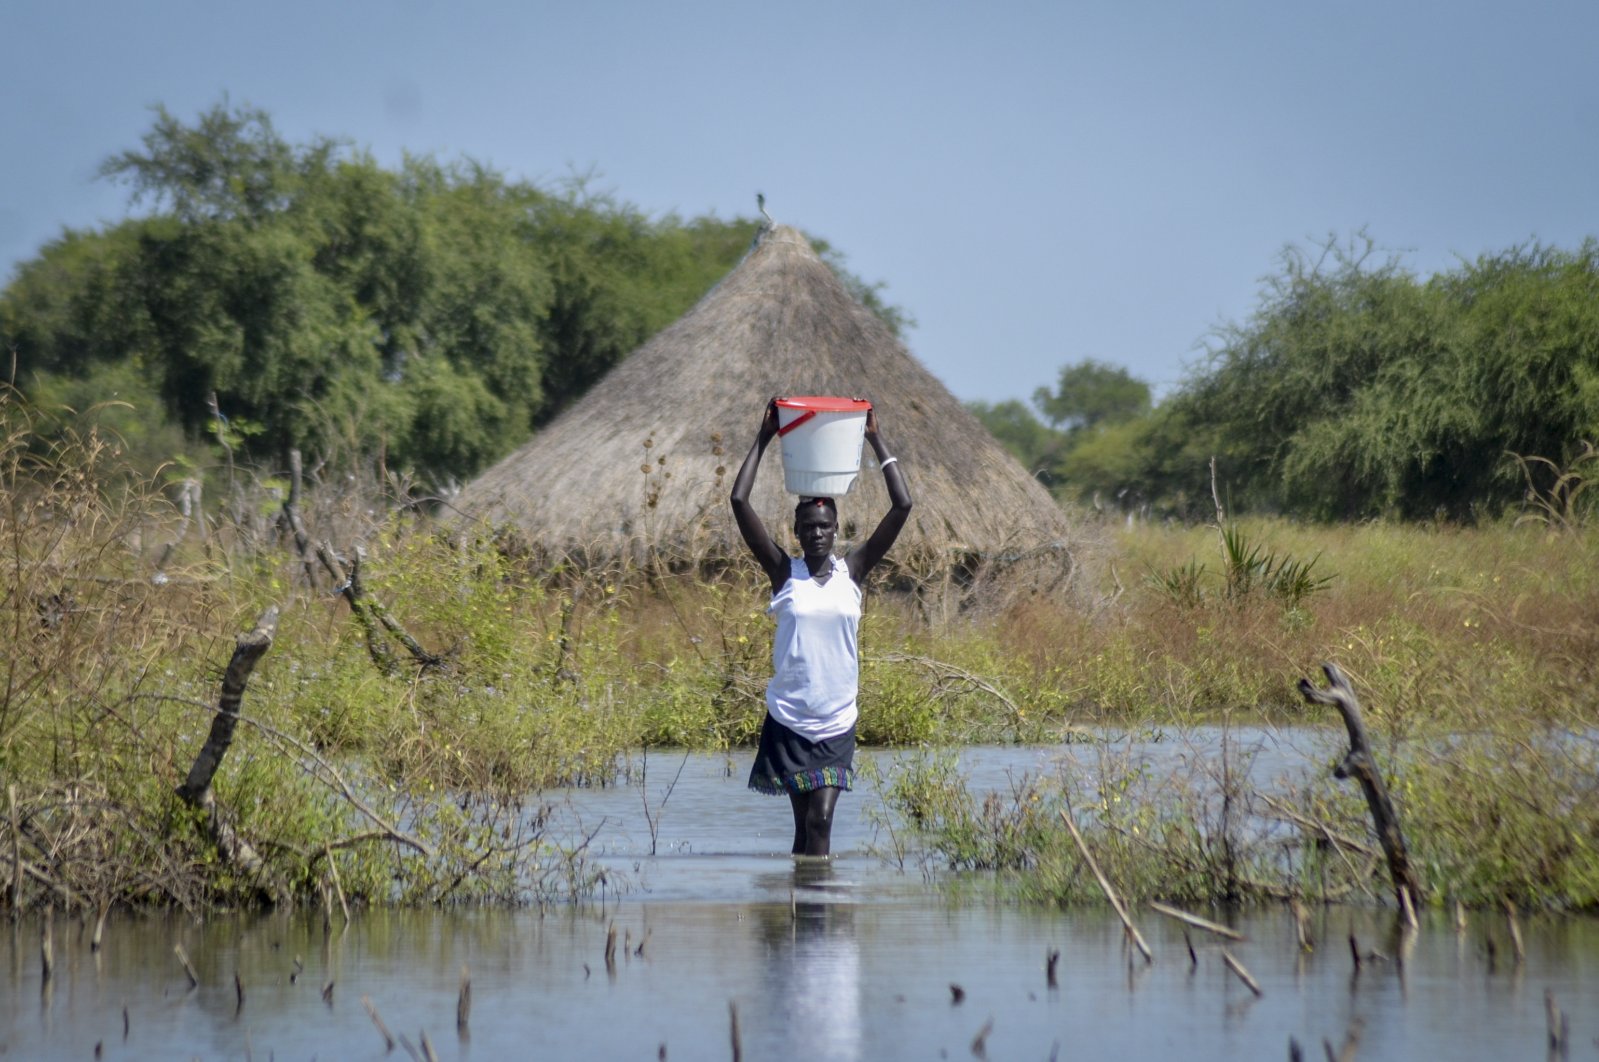 A woman carries a bucket on her head as she wades through floodwaters in the village of Wang Chot, Old Fangak county, Jonglei state, South Sudan, Nov. 26, 2020. (AP File Photo)